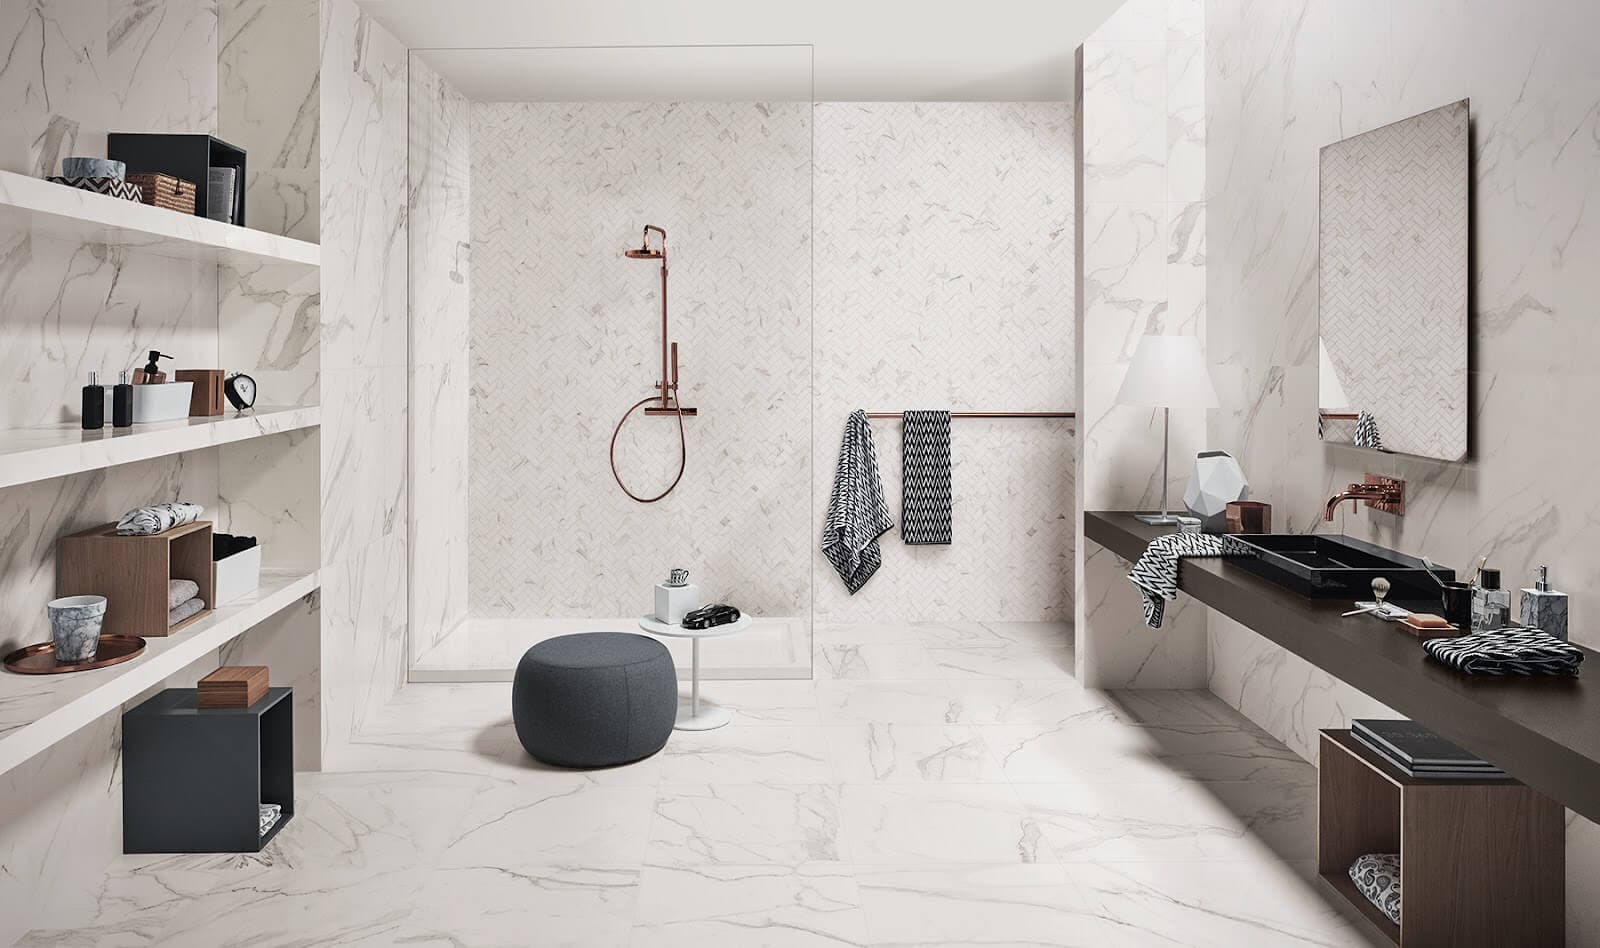 white spacious bathroom with ceramic tile in both shower and flooring, creating a minimalist design